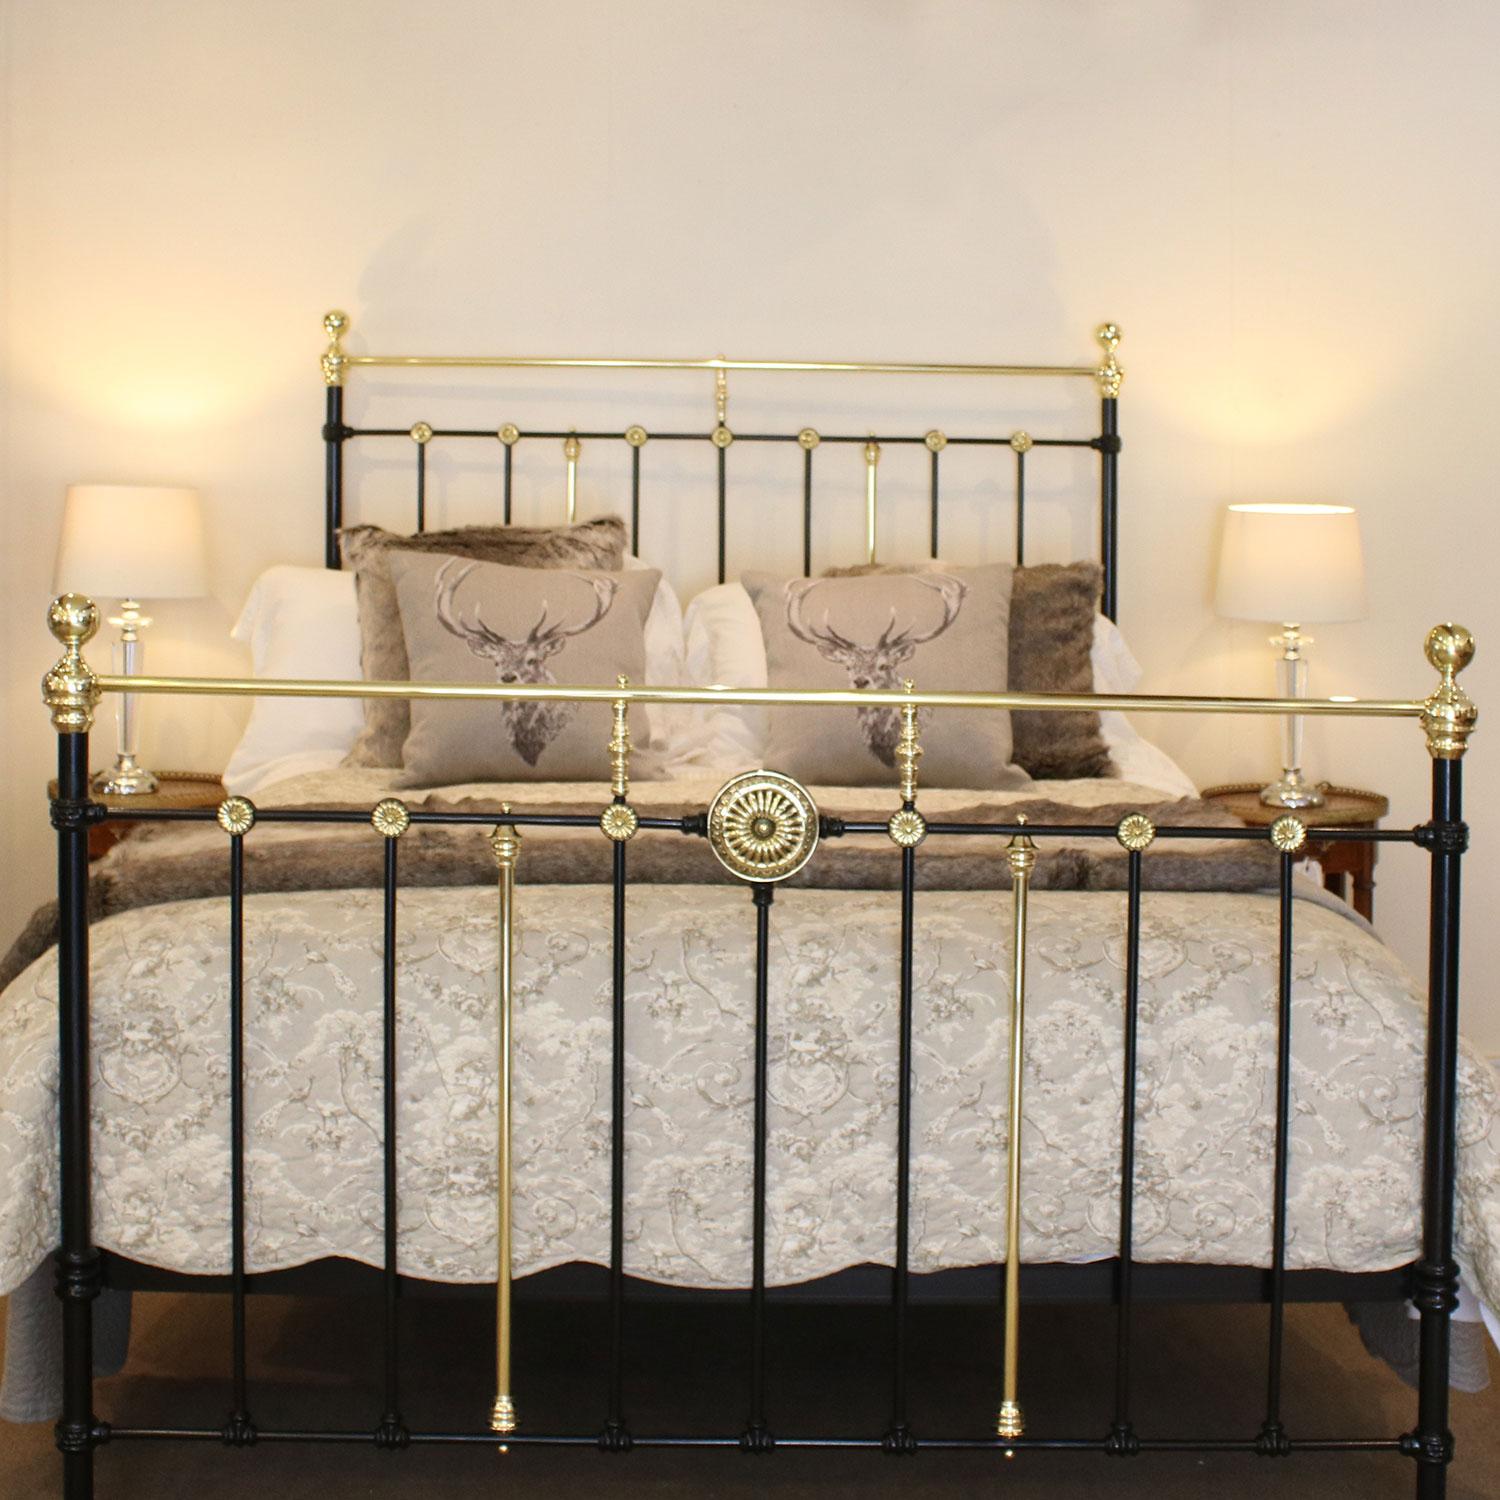 A brass and iron bedstead adapted from an original Victorian frame, finished in black with decorative brass rosettes.

This bed accepts a British king-size or US queen-size (measure: 5ft, 60 in or 150cm wide) base and mattress set.

The price is